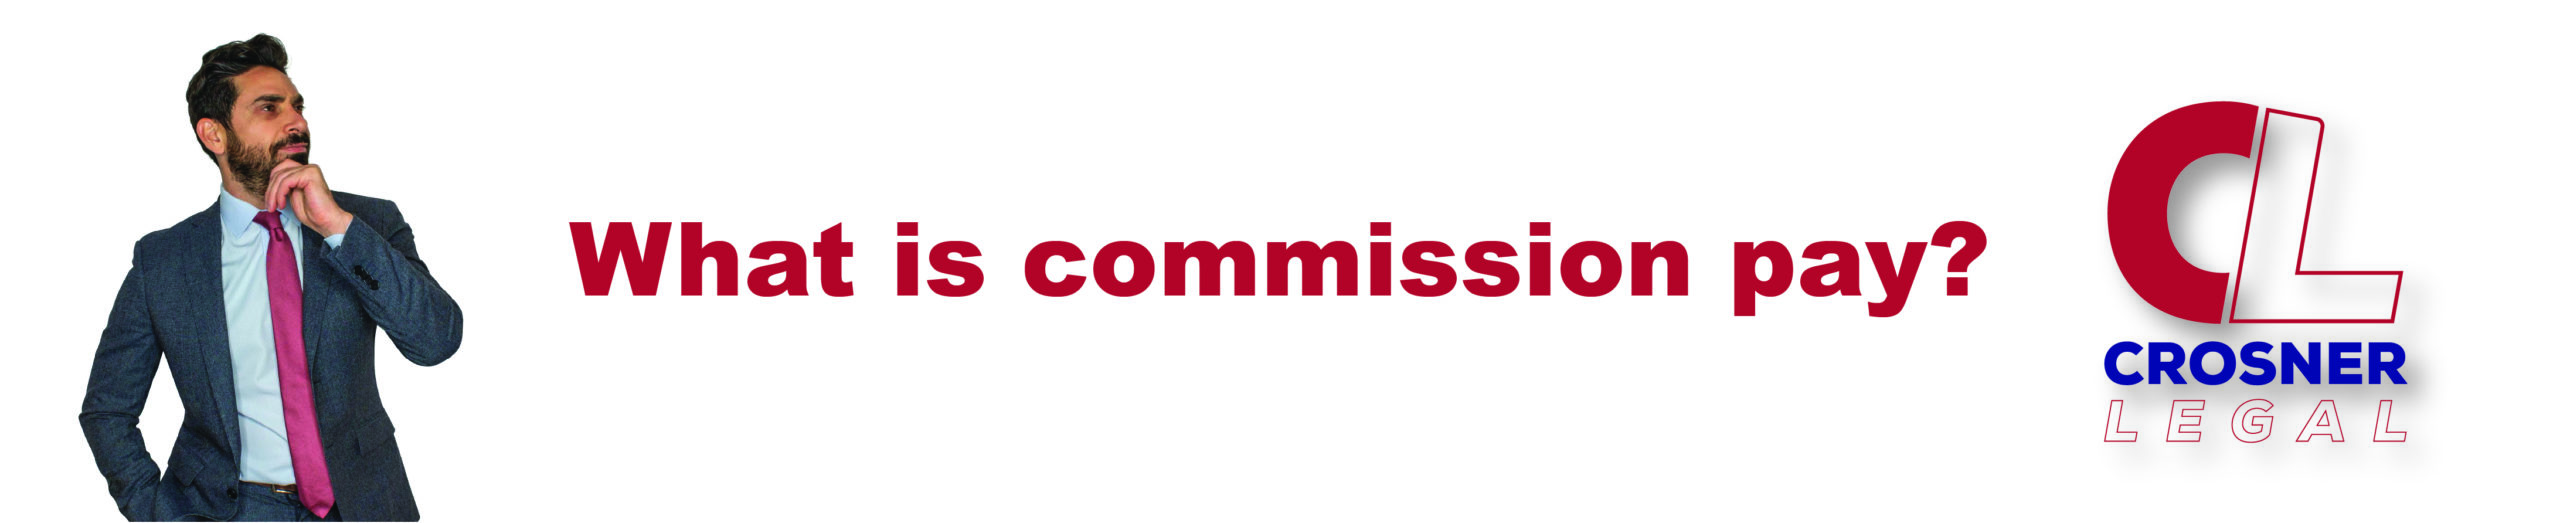 What is commission pay?